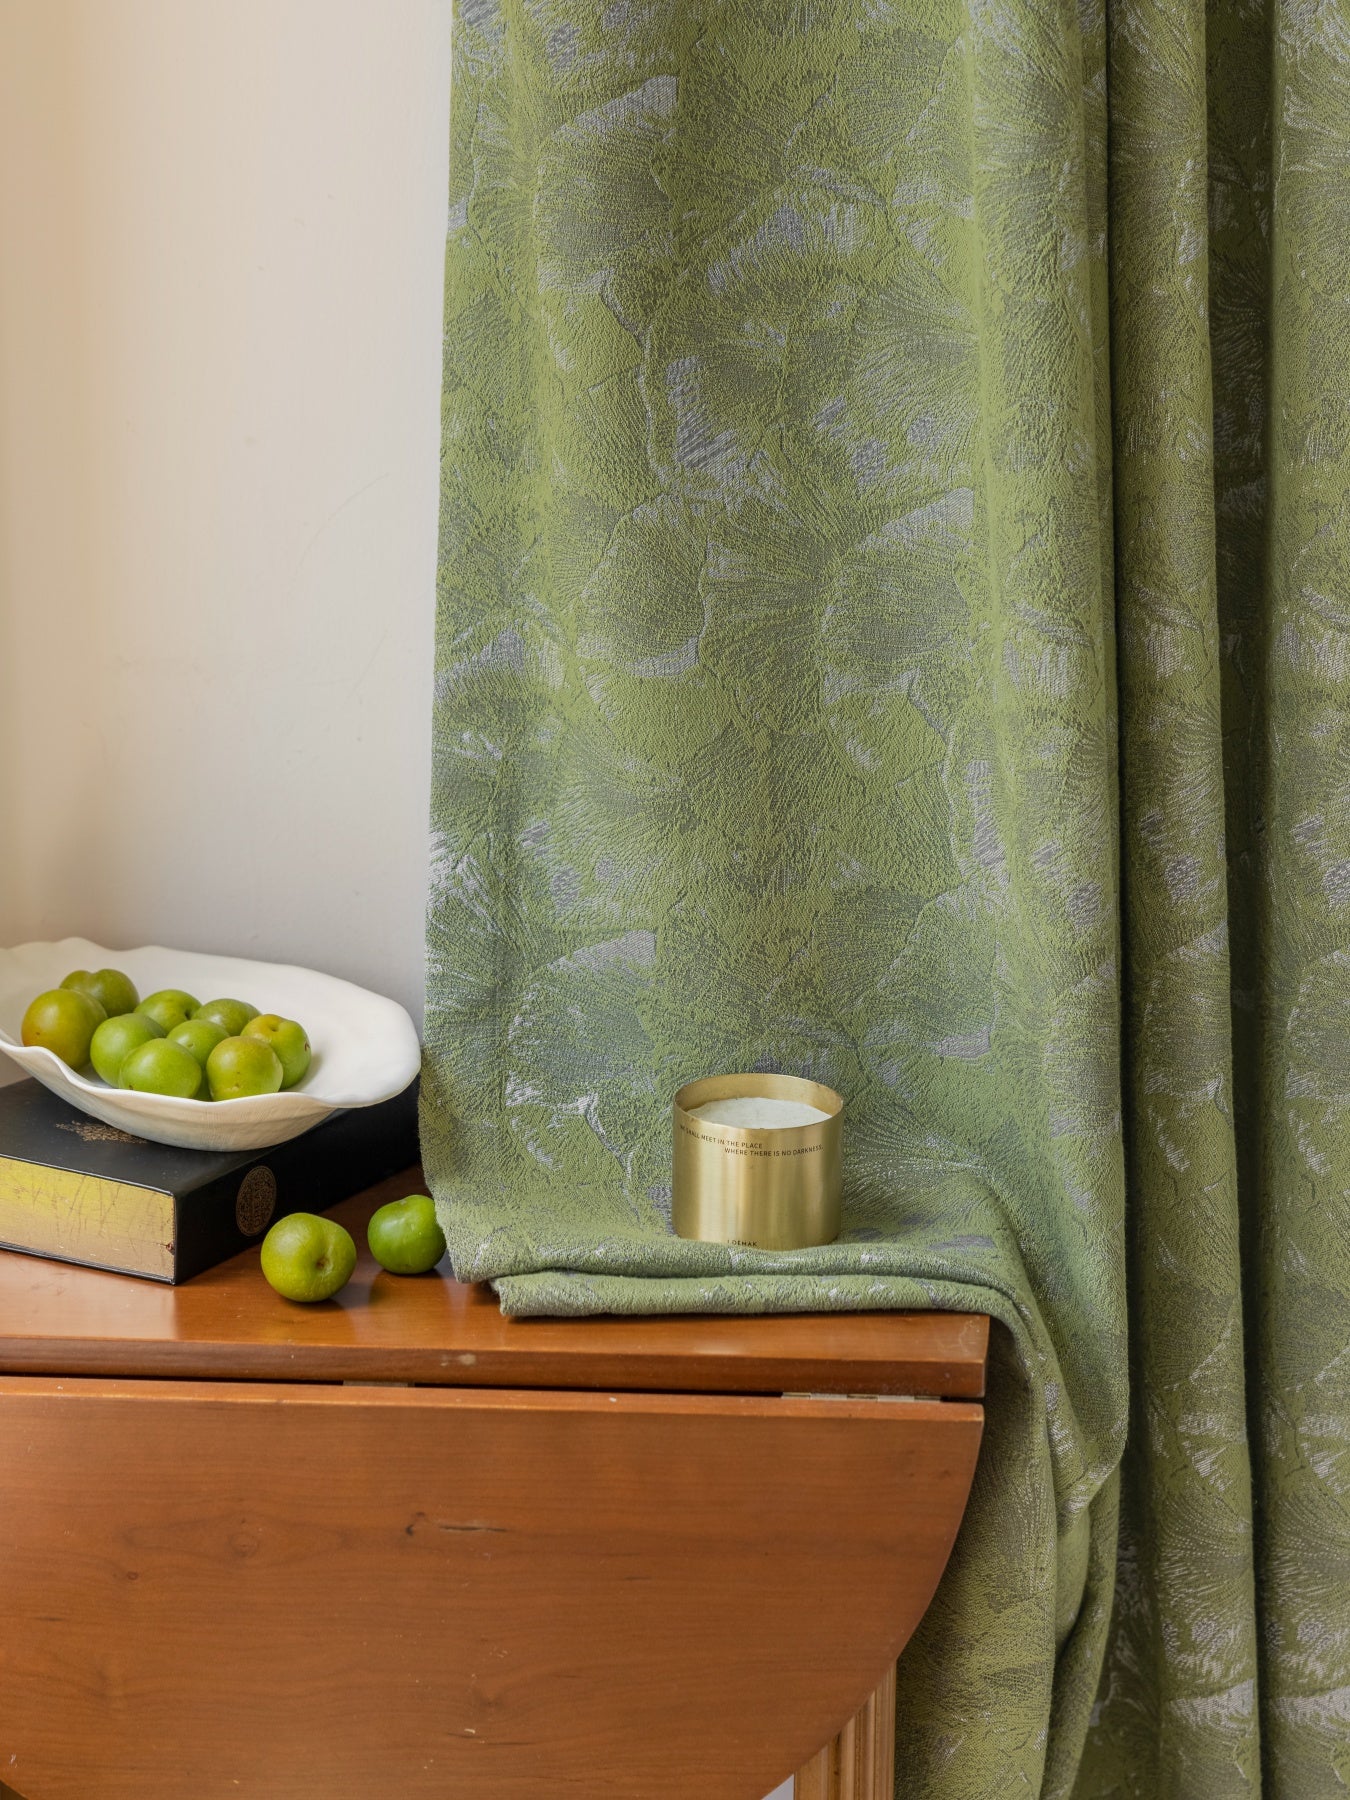 Elegant green ginkgo leaf-patterned blackout curtain beside a wooden dresser with grapes and a candle, showcasing luxurious home decor